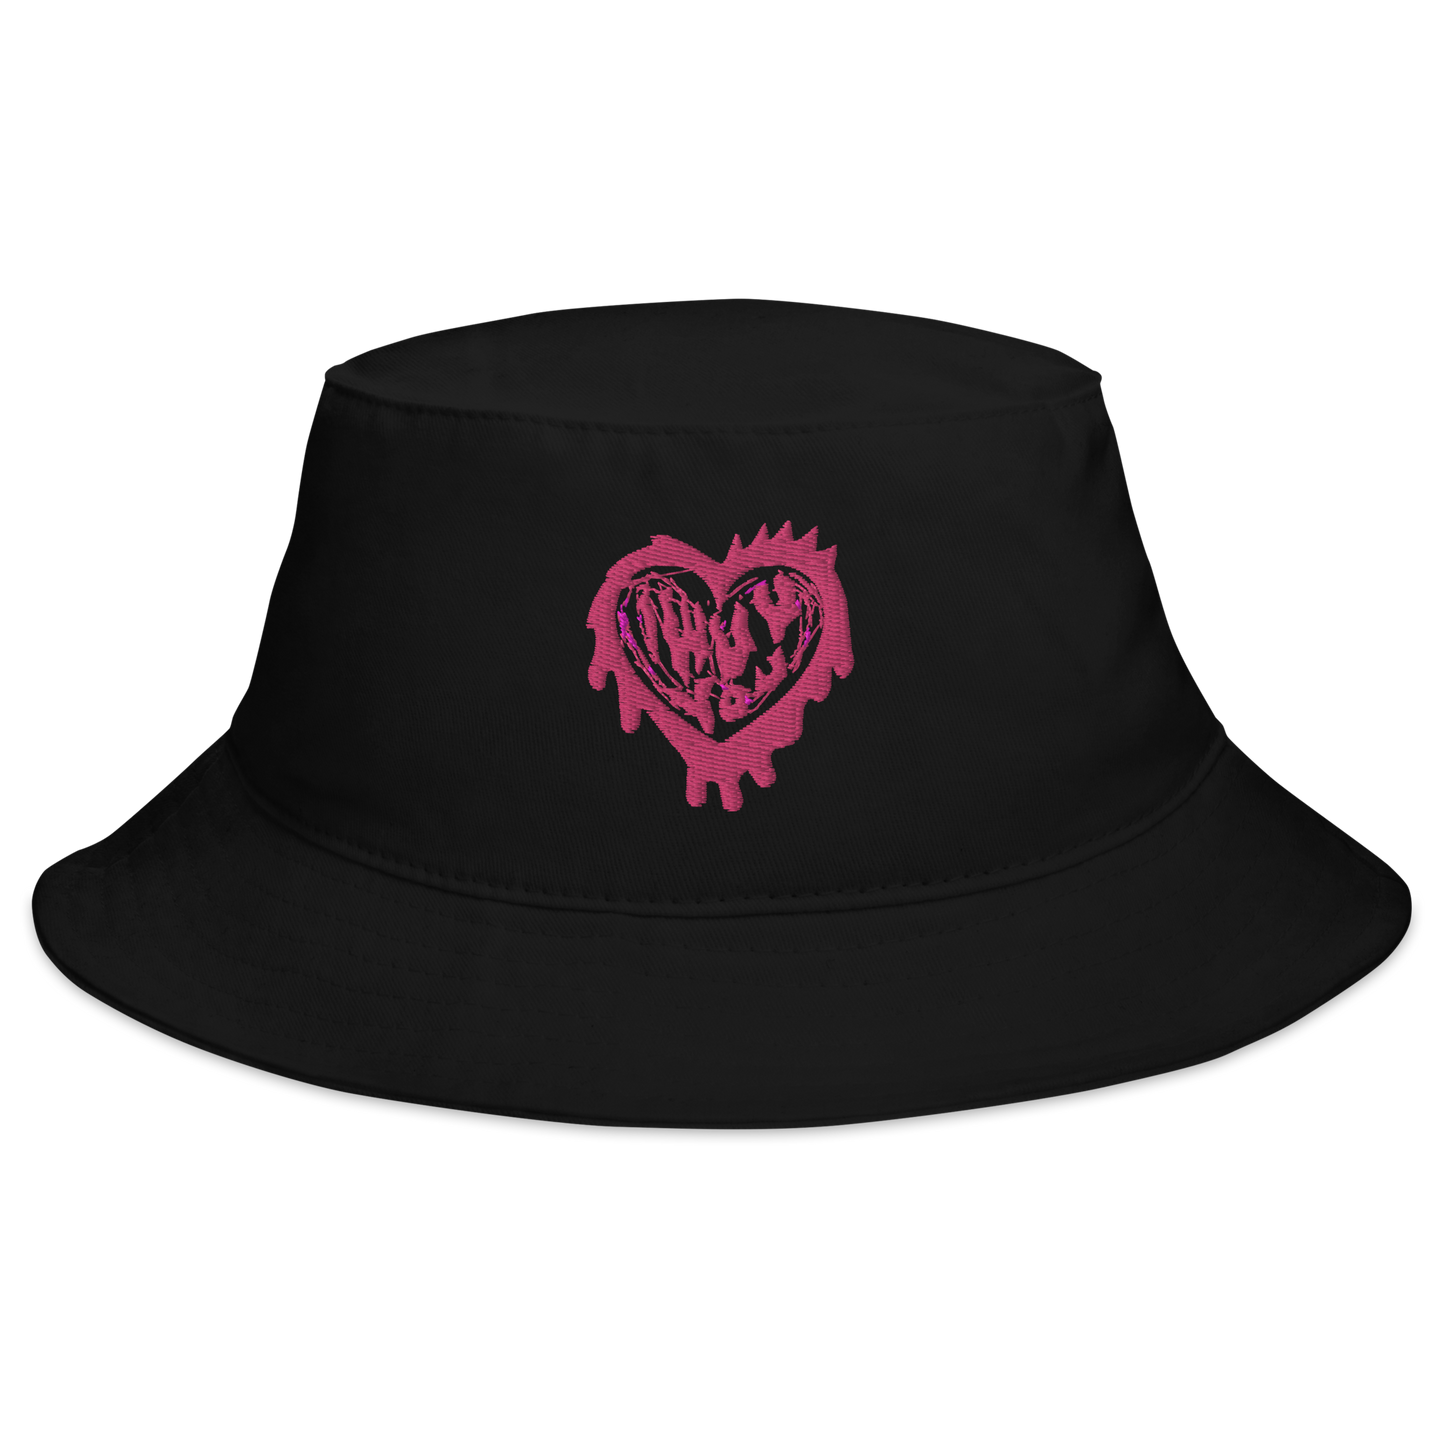 Wuv You Heart in Pink on Black Bucket Hat